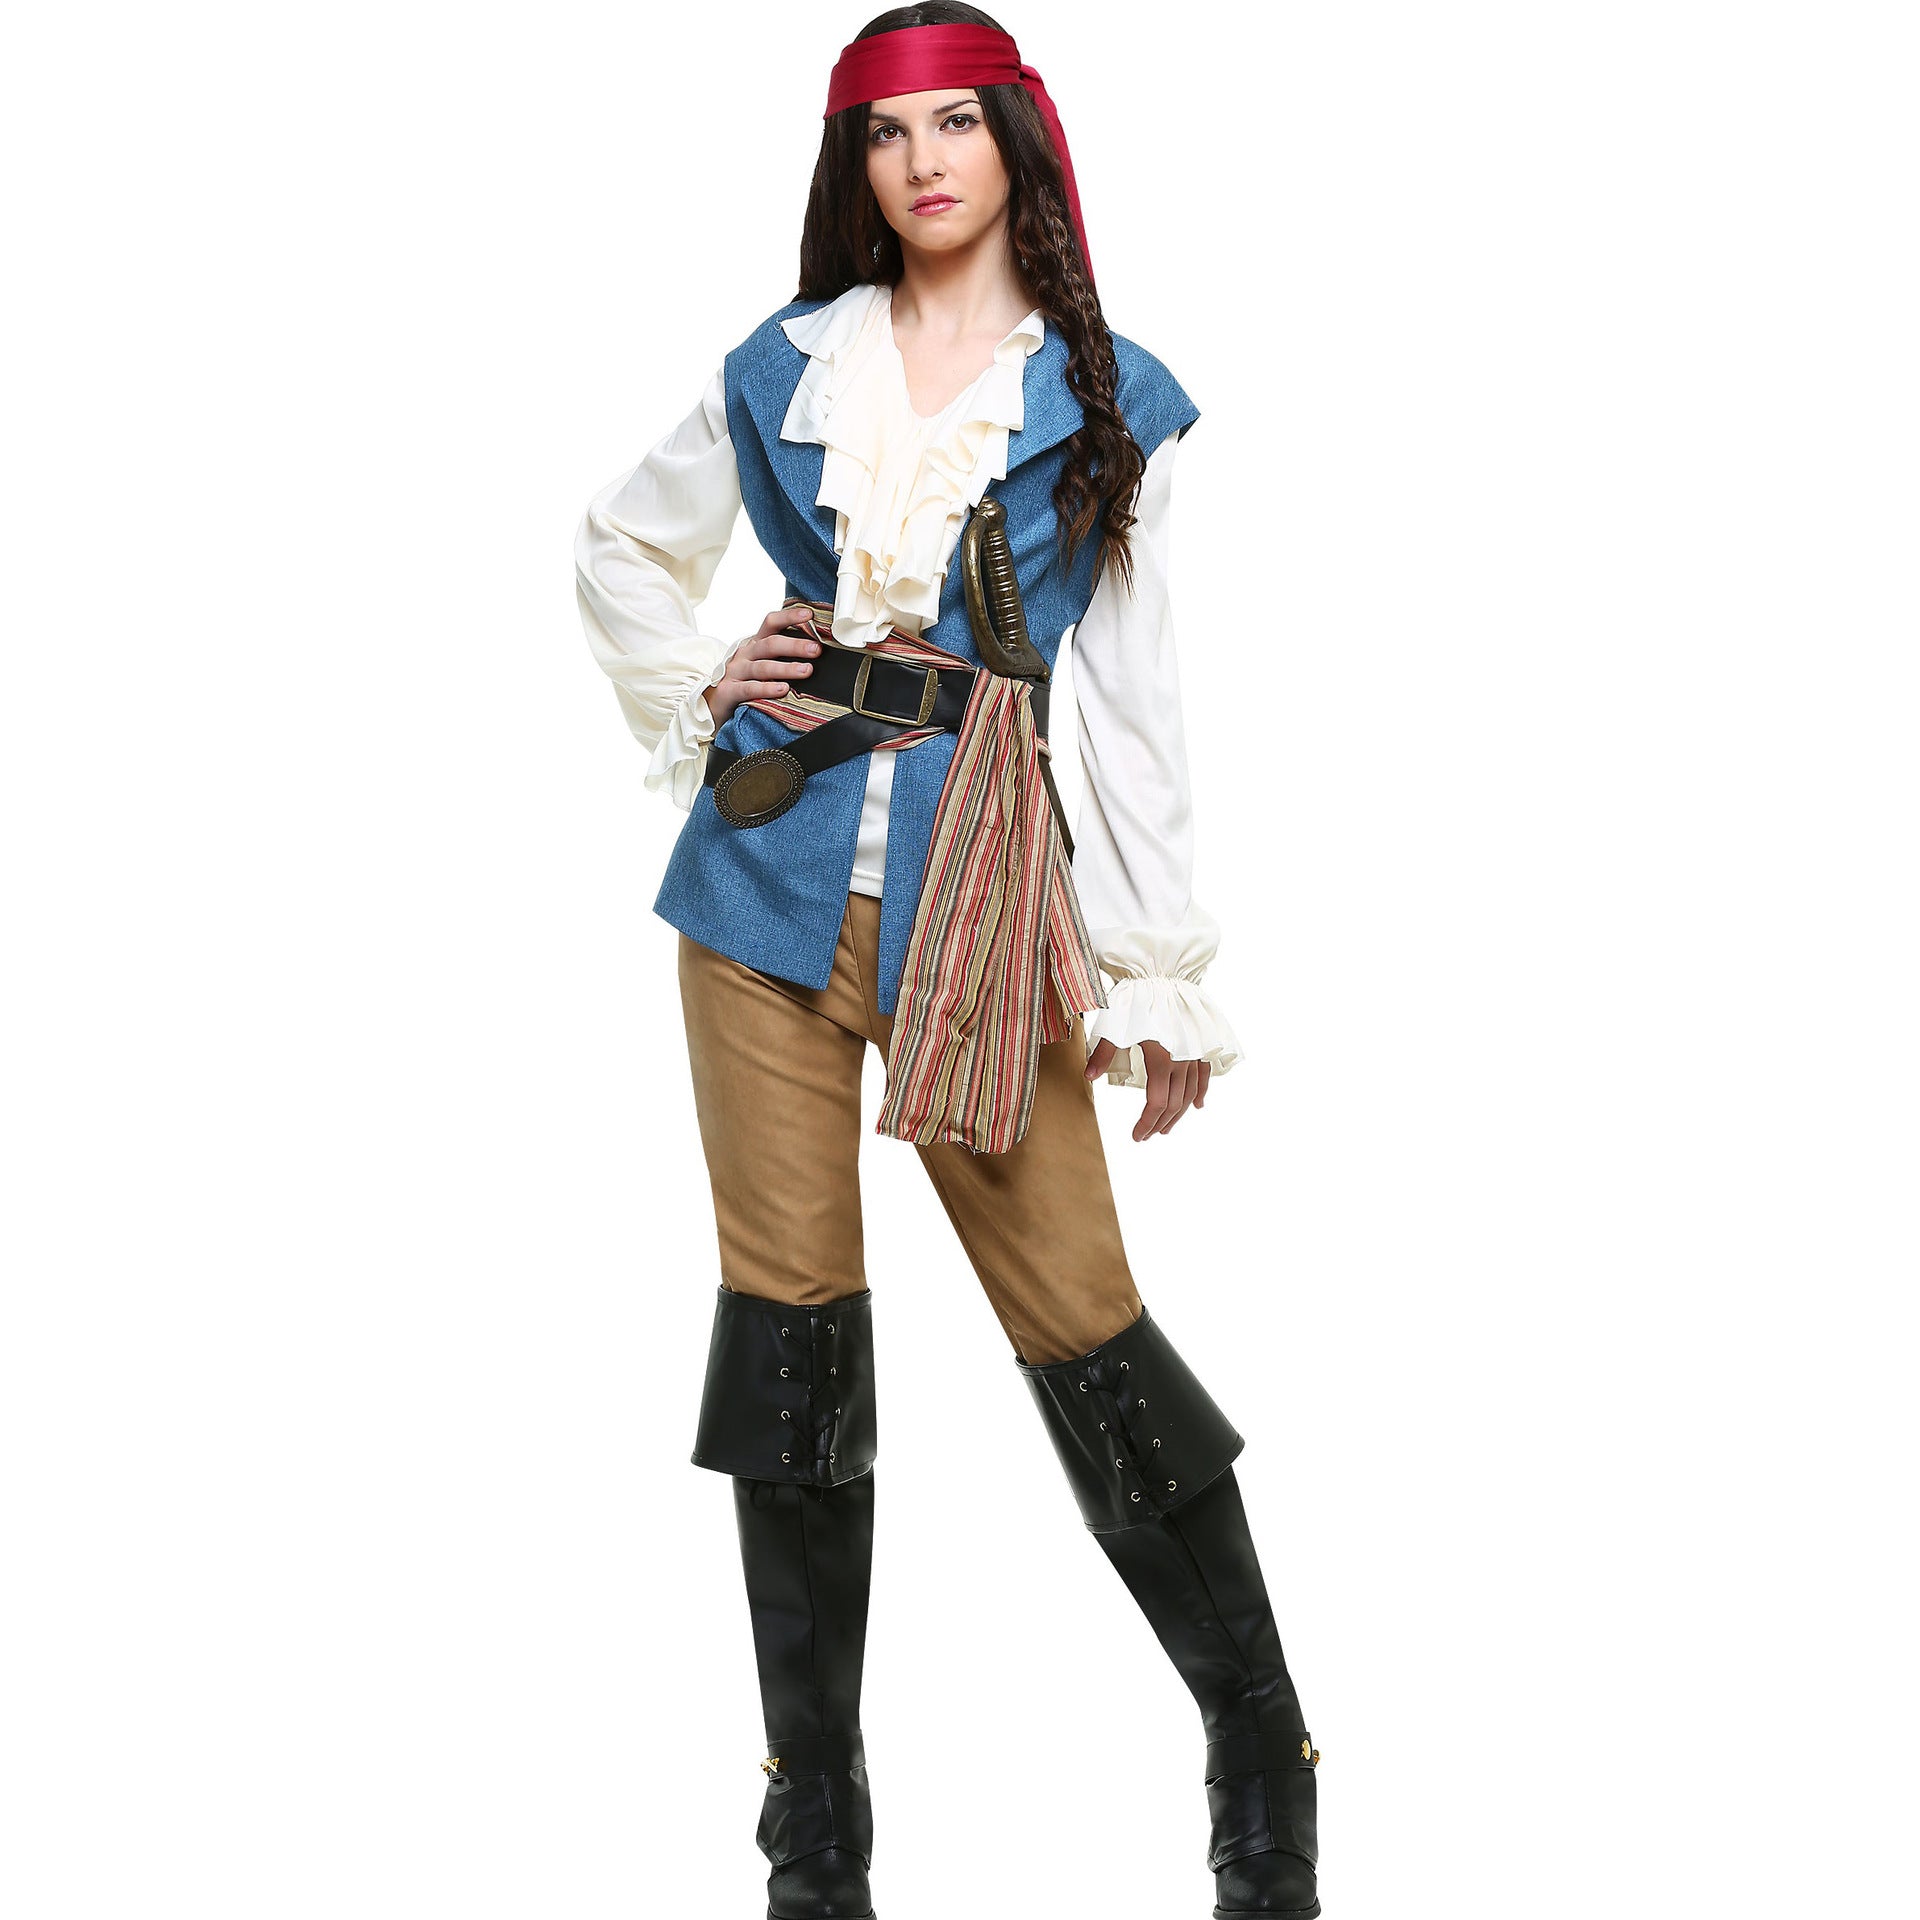 Women's & Men's & Halloween Pirate And Couple Masquerade Costumes